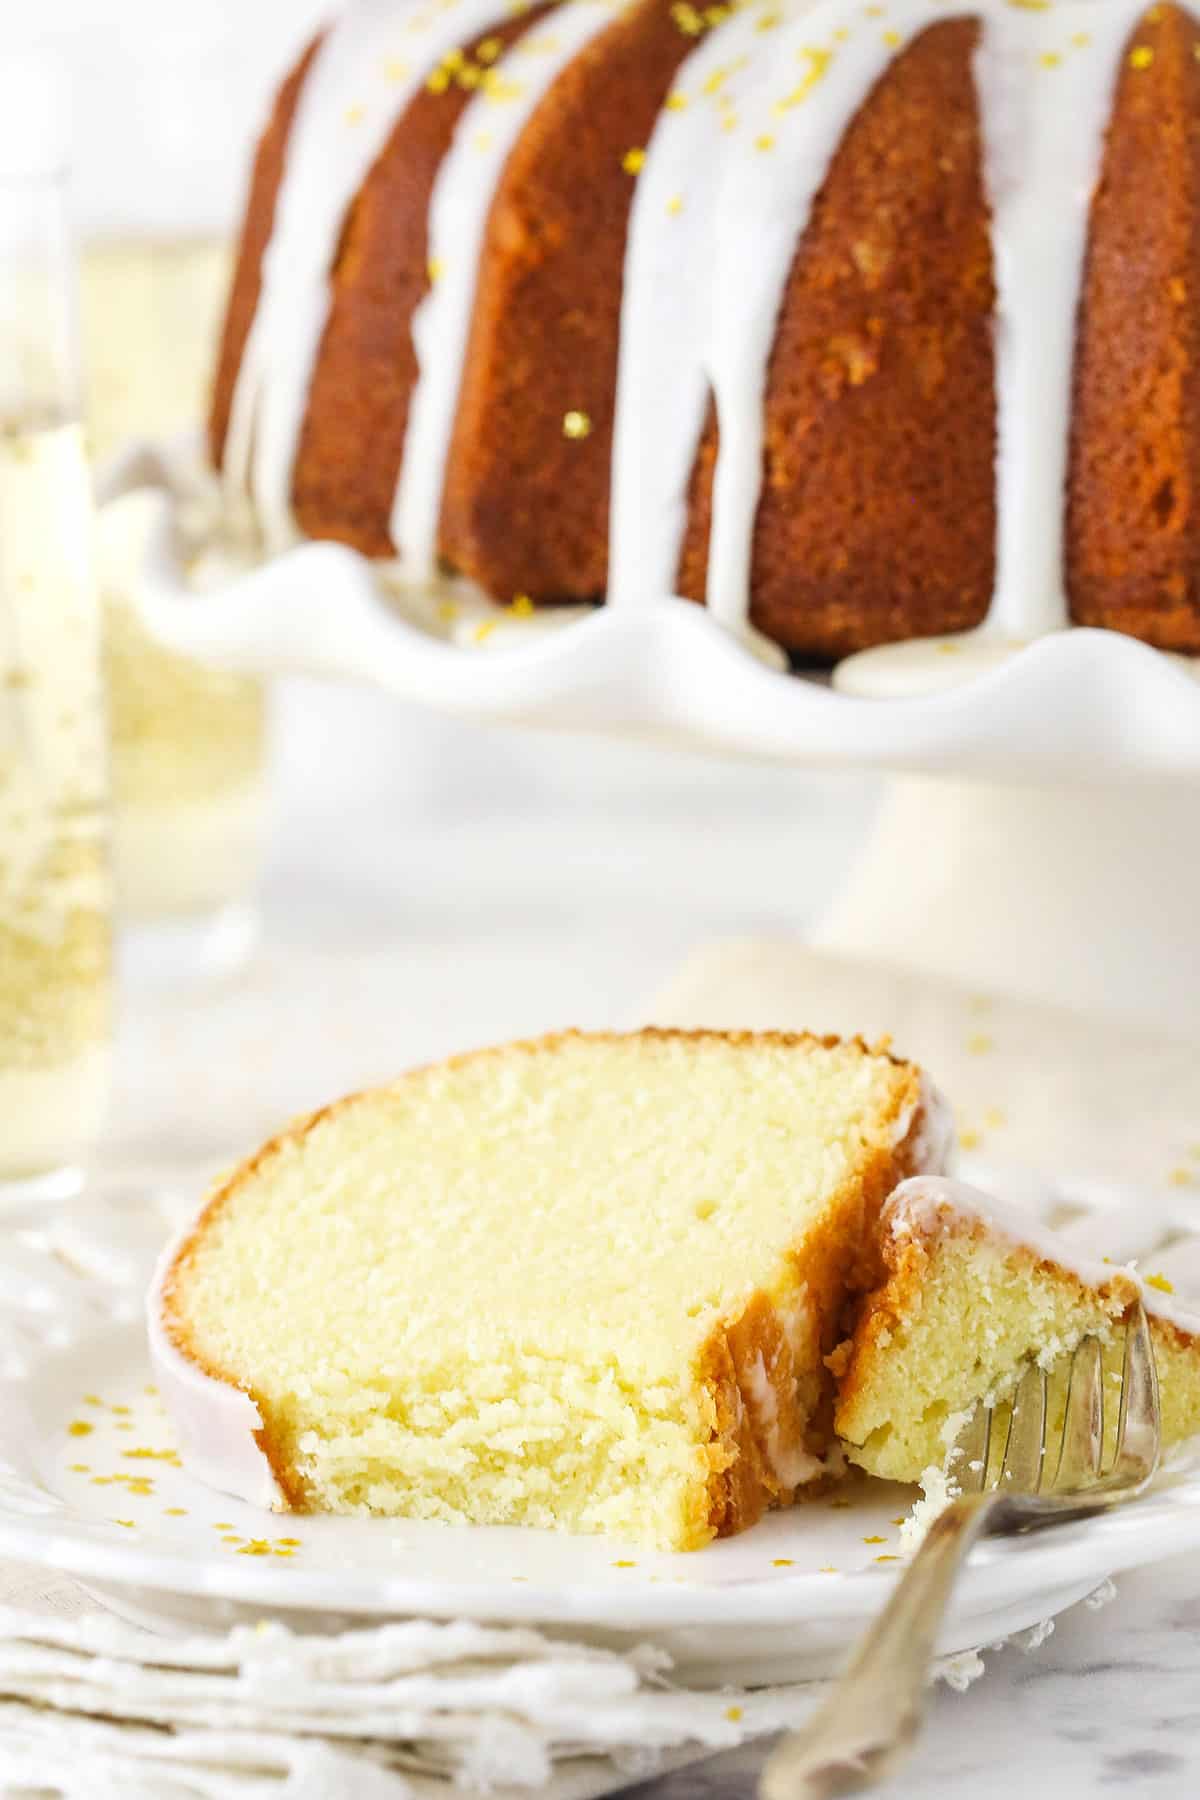 A Piece of Champagne Cake on a White Plate with One Bite on a Fork.